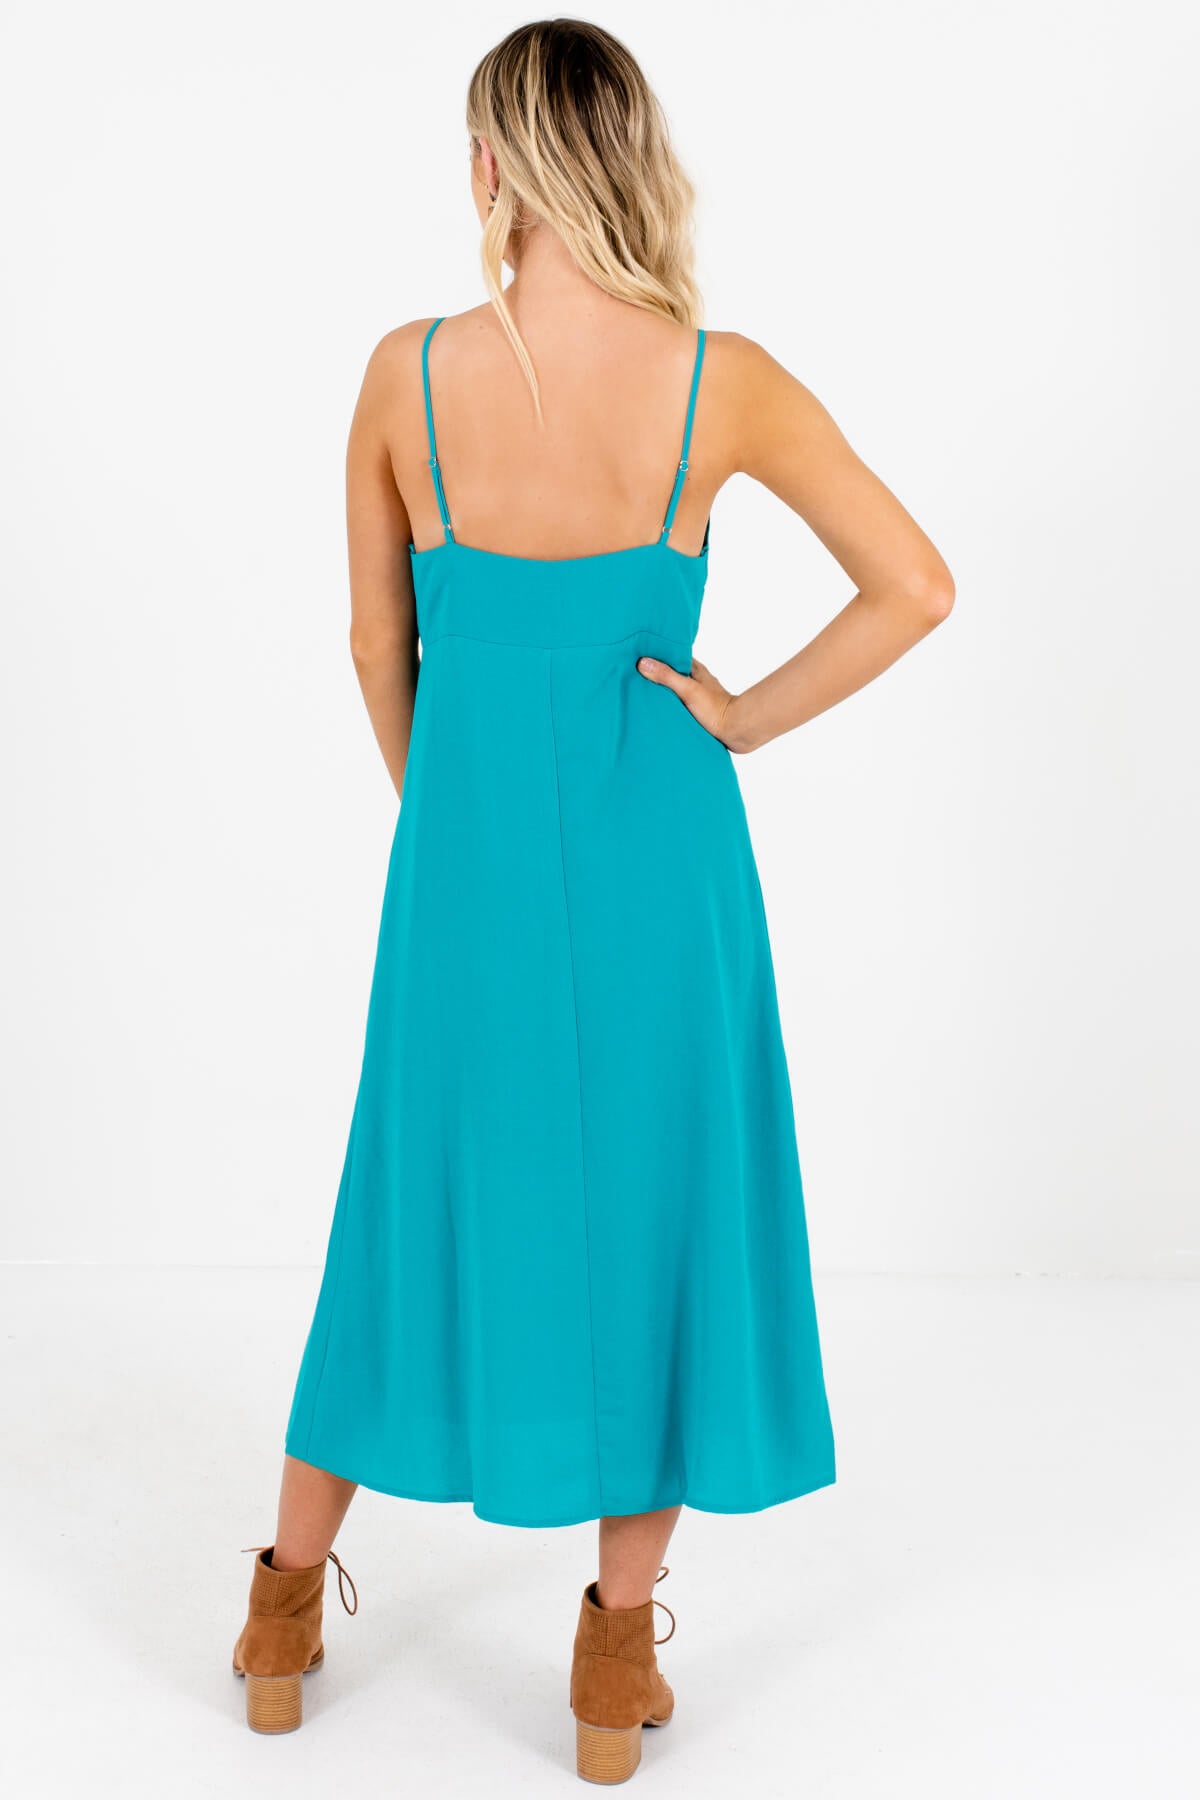 Turquoise Teal Button-Up Tie-Front Midi Dresses for Women